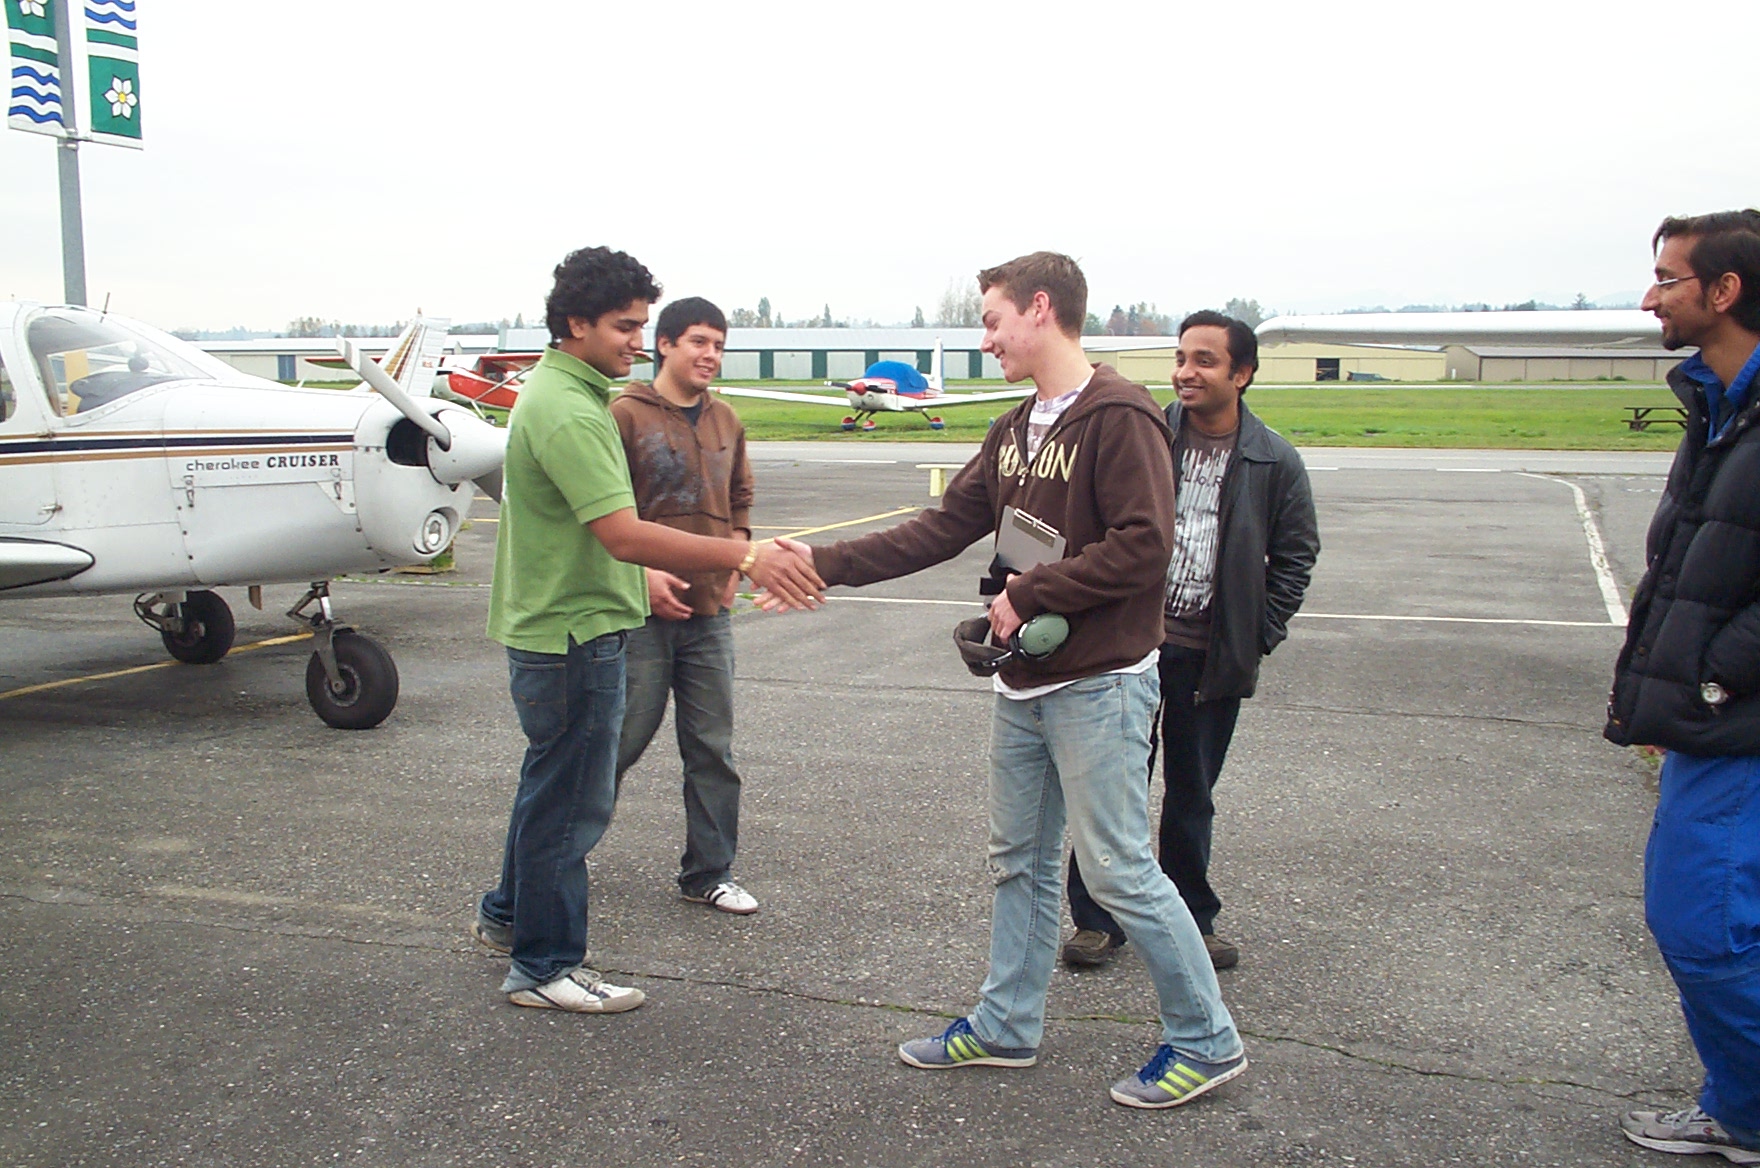 Kyle Rempel congratuled by fellow students following his First Solo Flight, October 18, 2010.